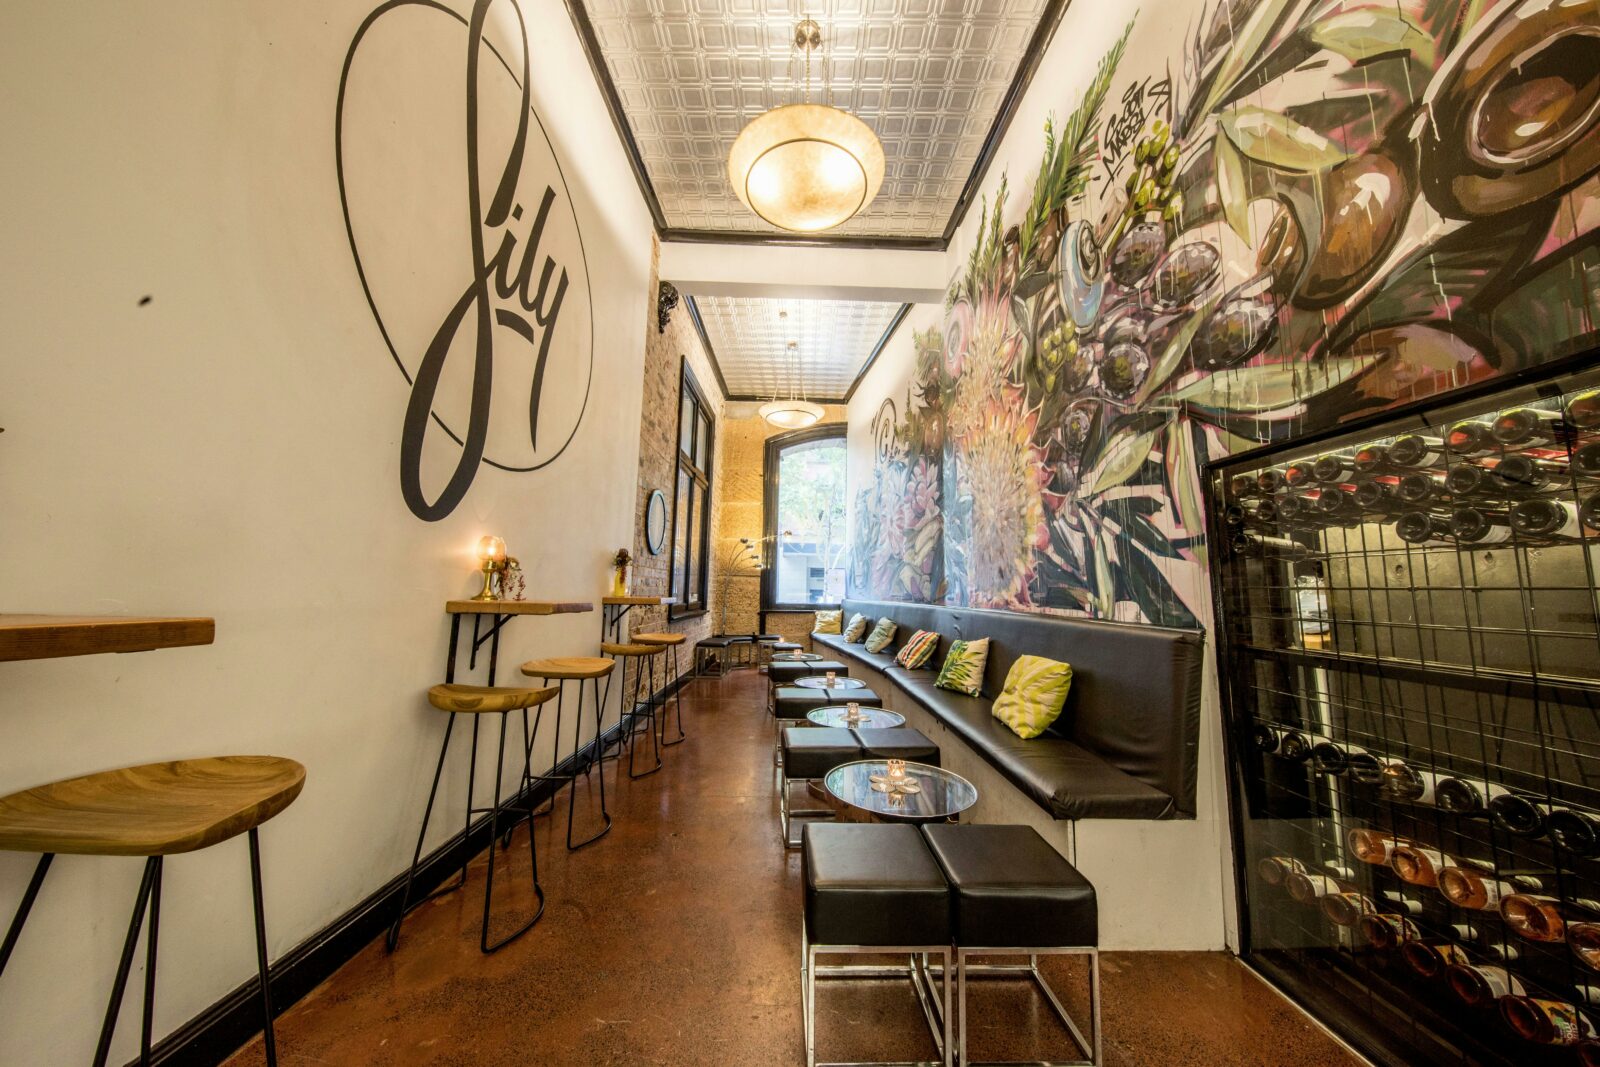 A narrow indoor seating area with colorful murals on each wall,